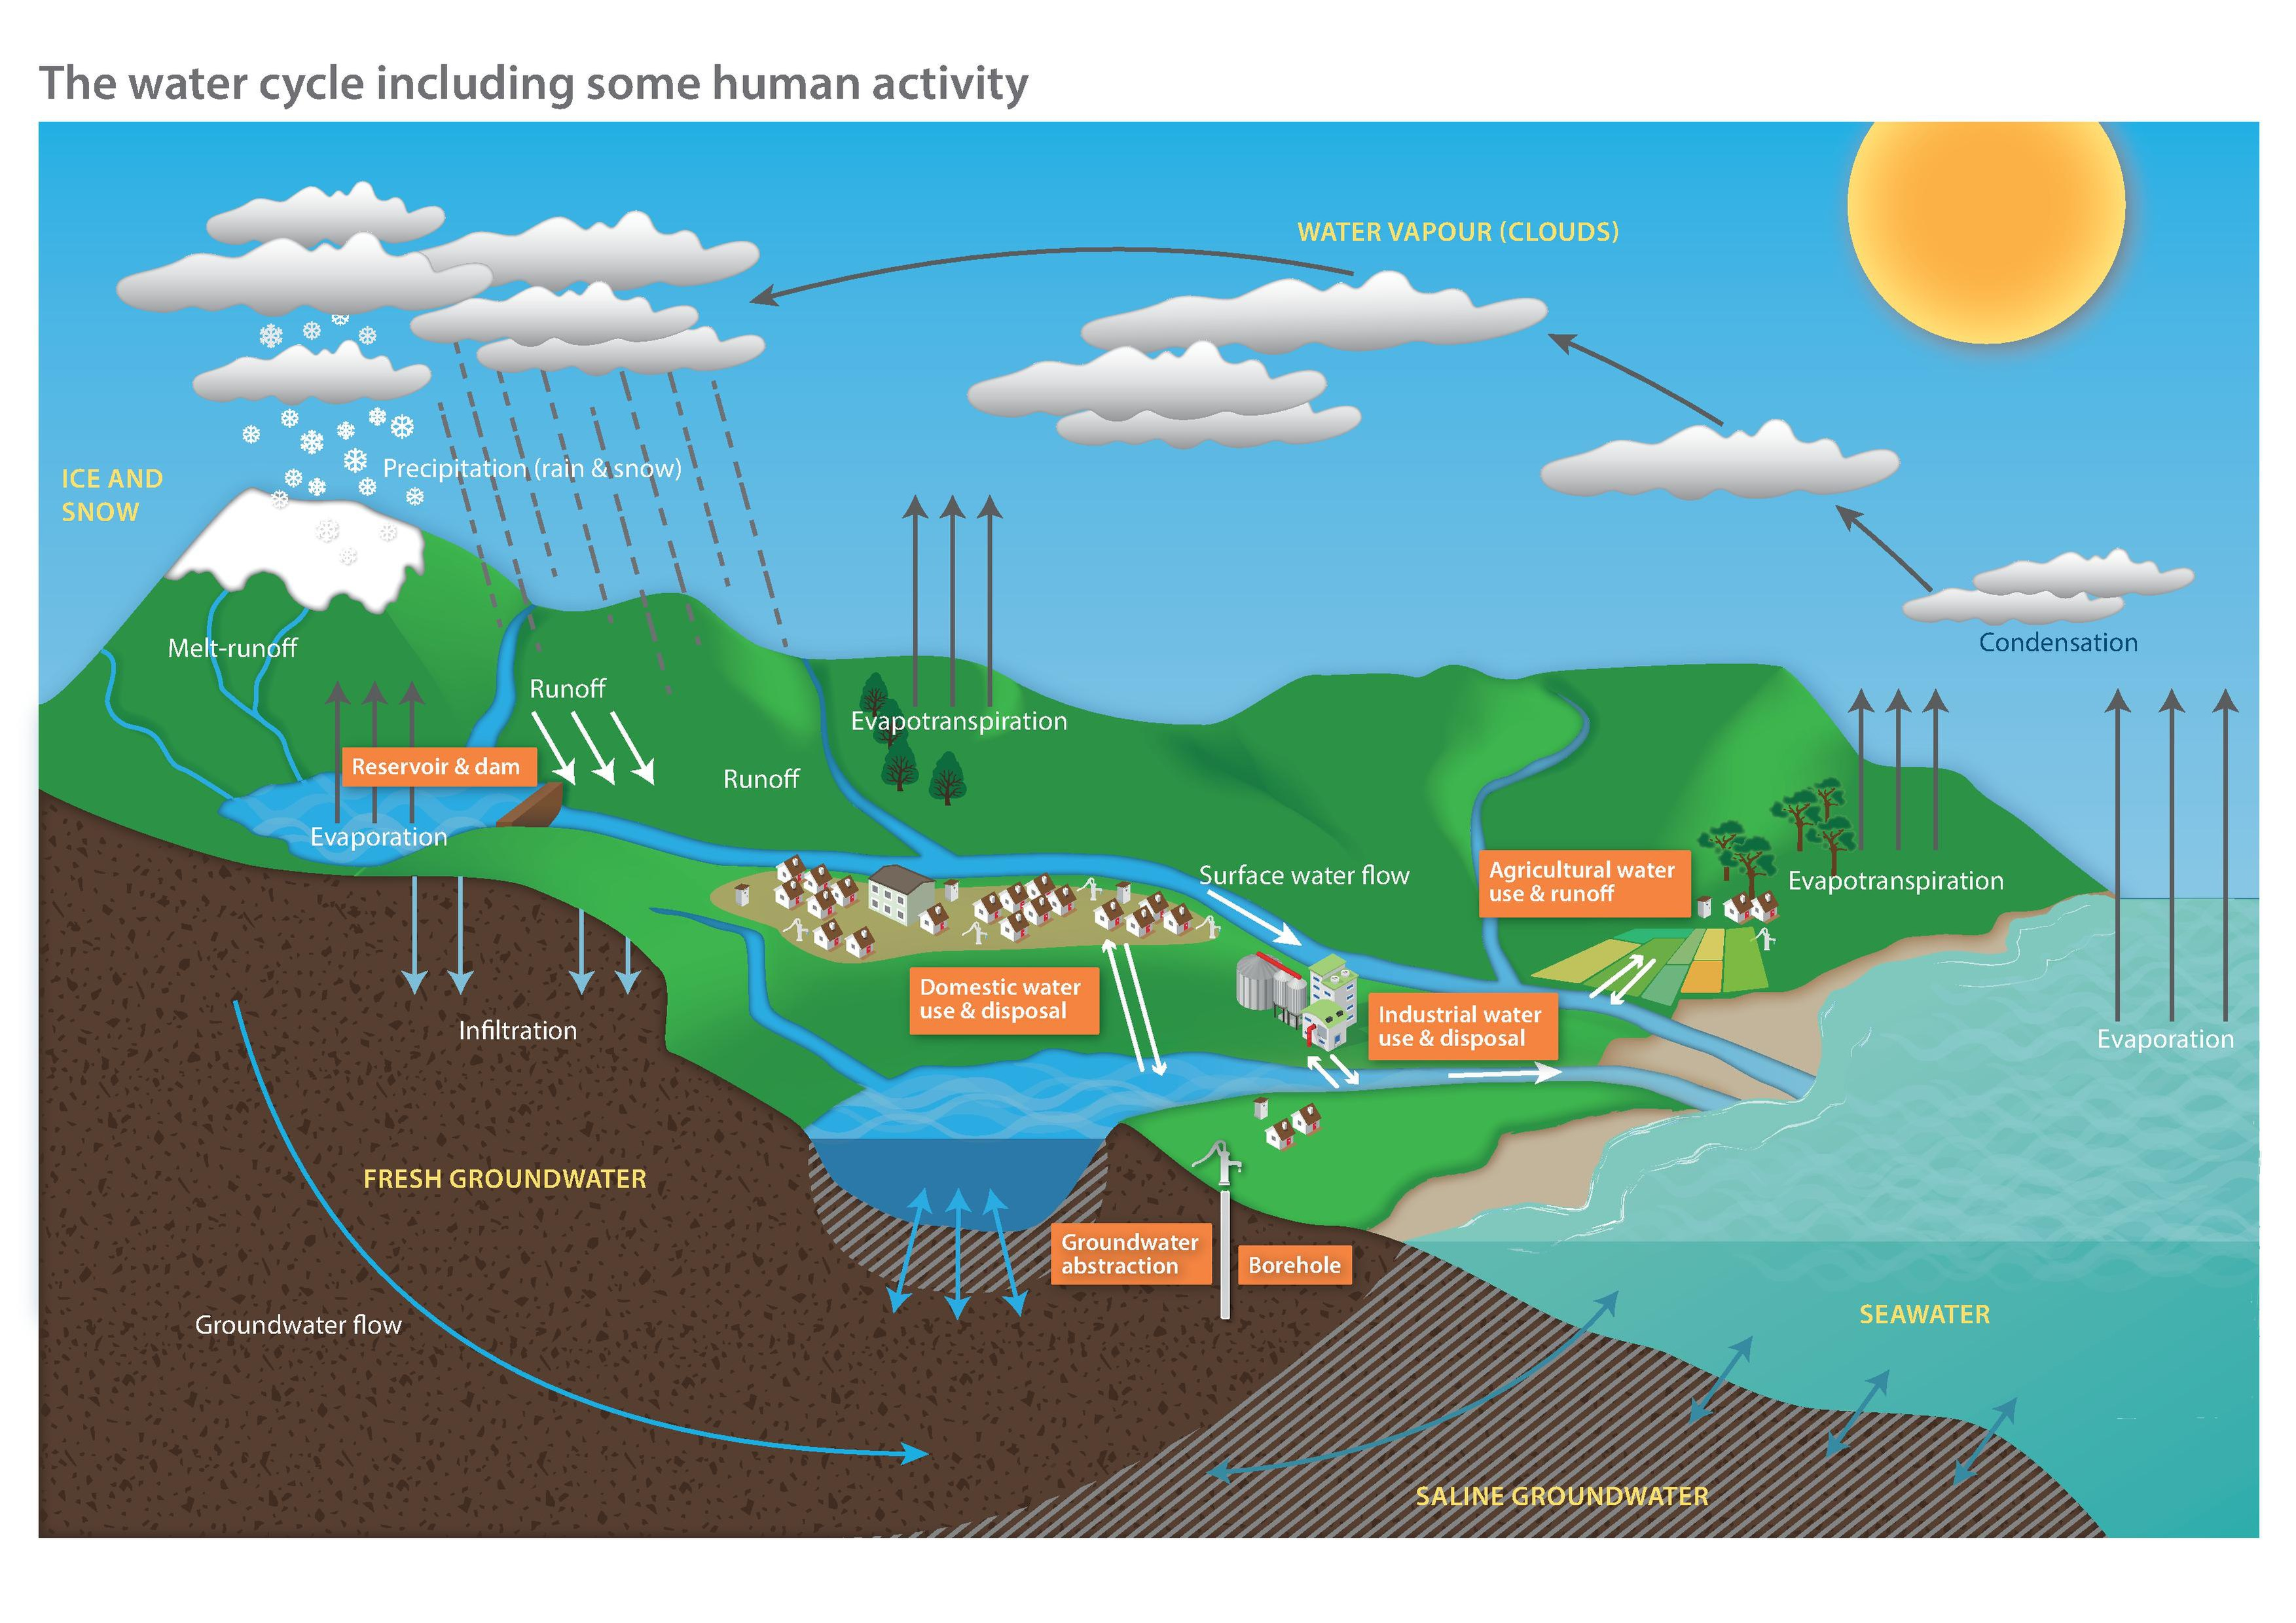 Water Cycle Diagram Filediagram Of The Water Cycle Including Some Human Activitypdf